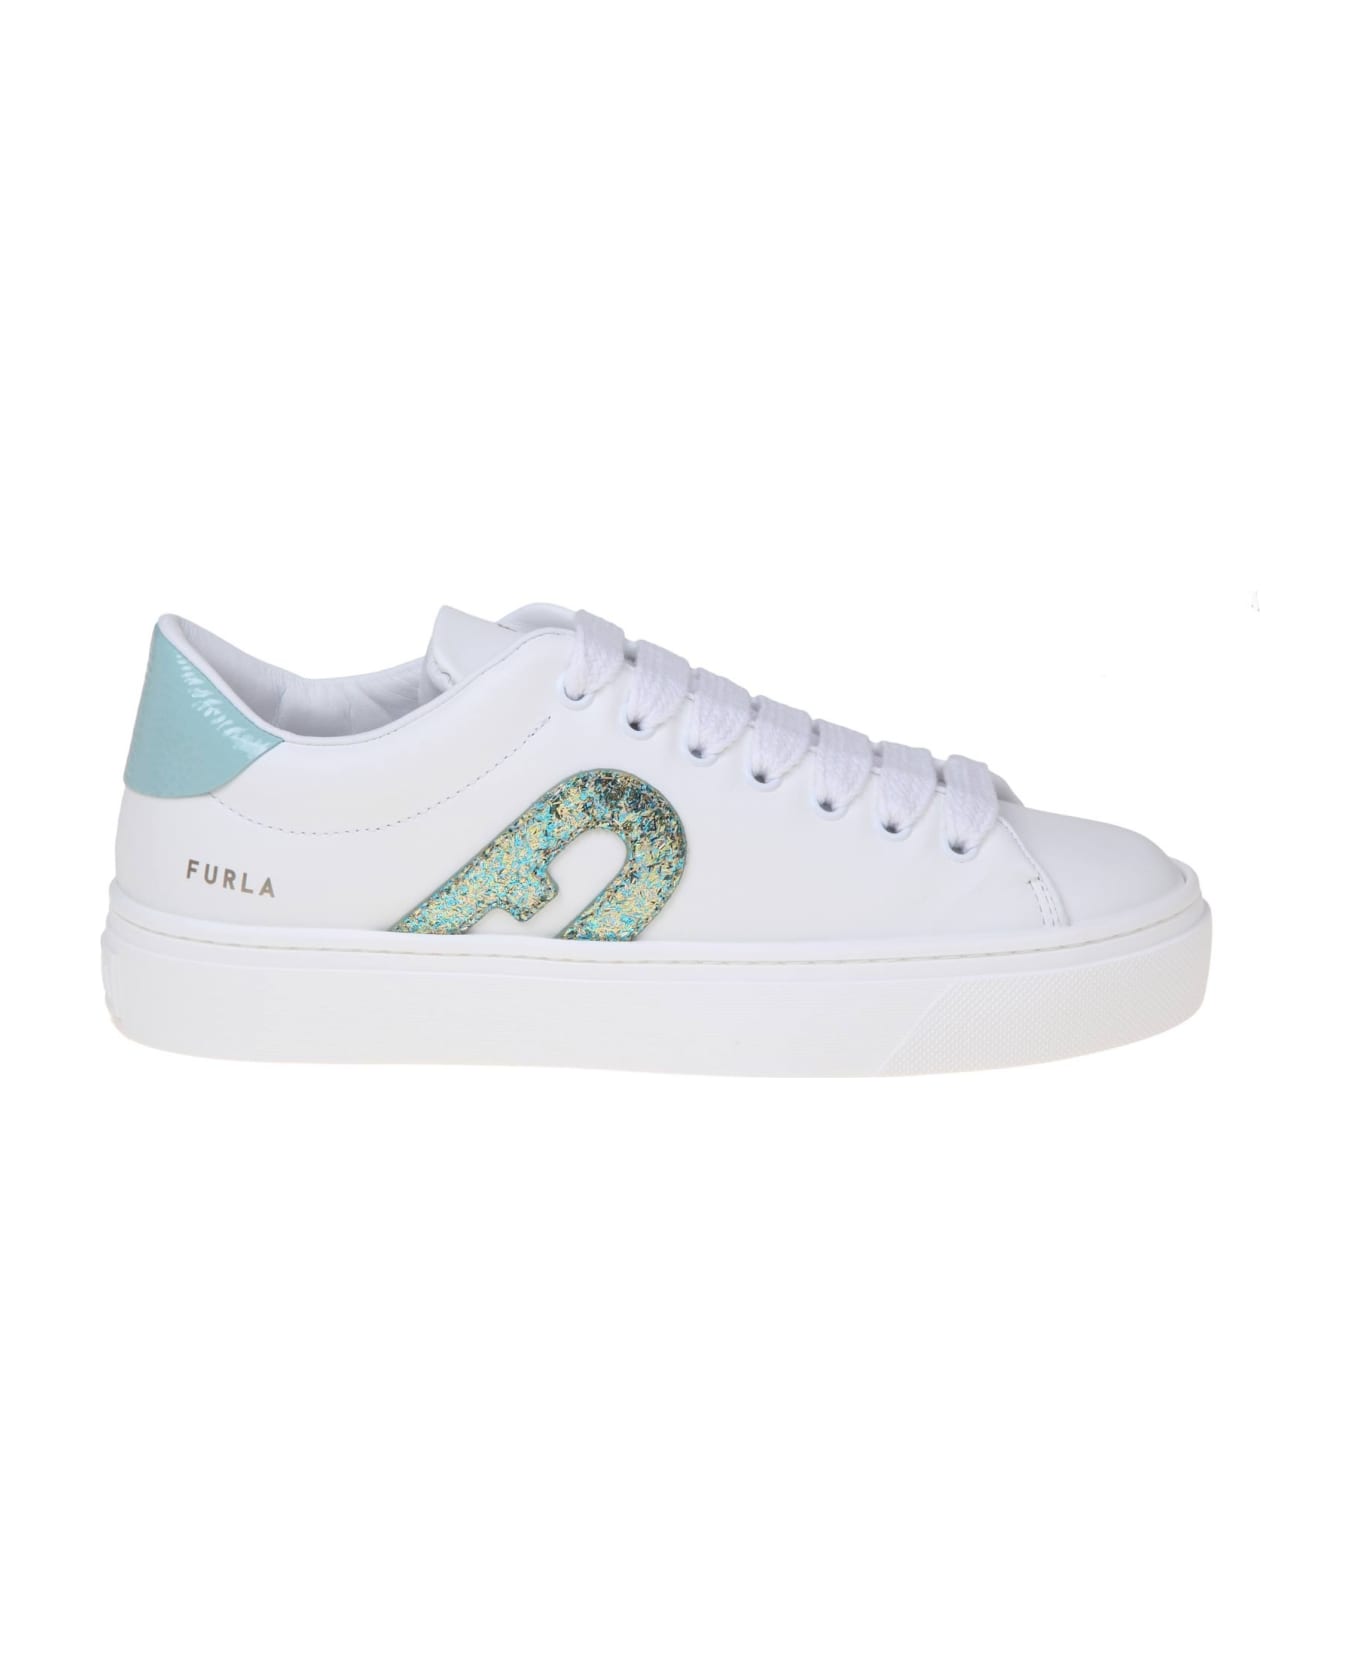 Furla Joy Lace Up Sneakers In White Leather - TALC/VERGOLD